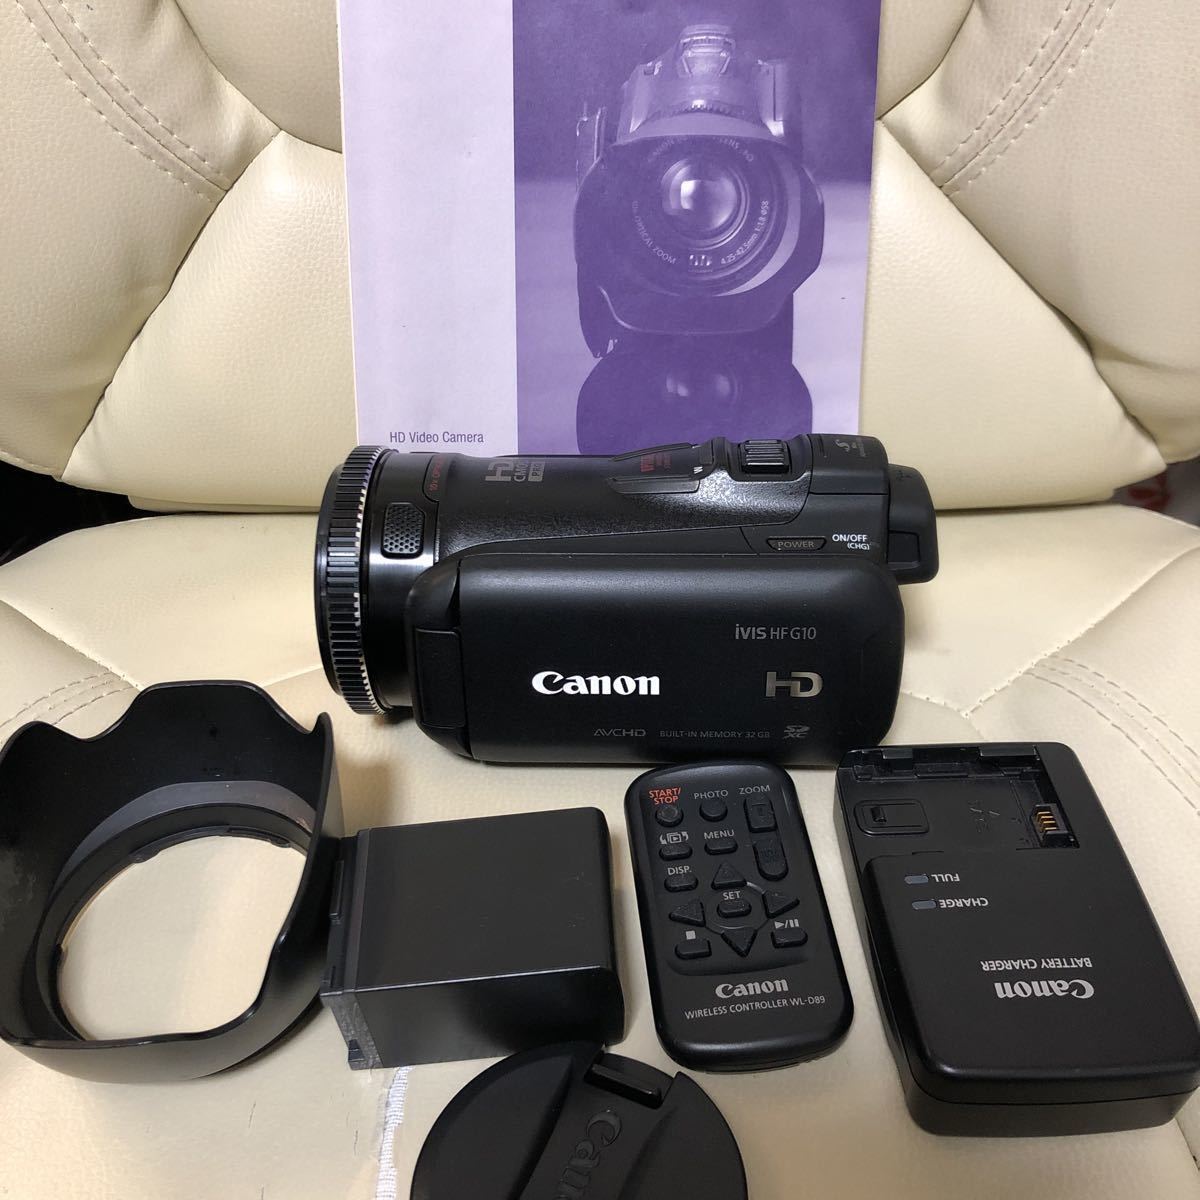 Canon iVIS HF G10